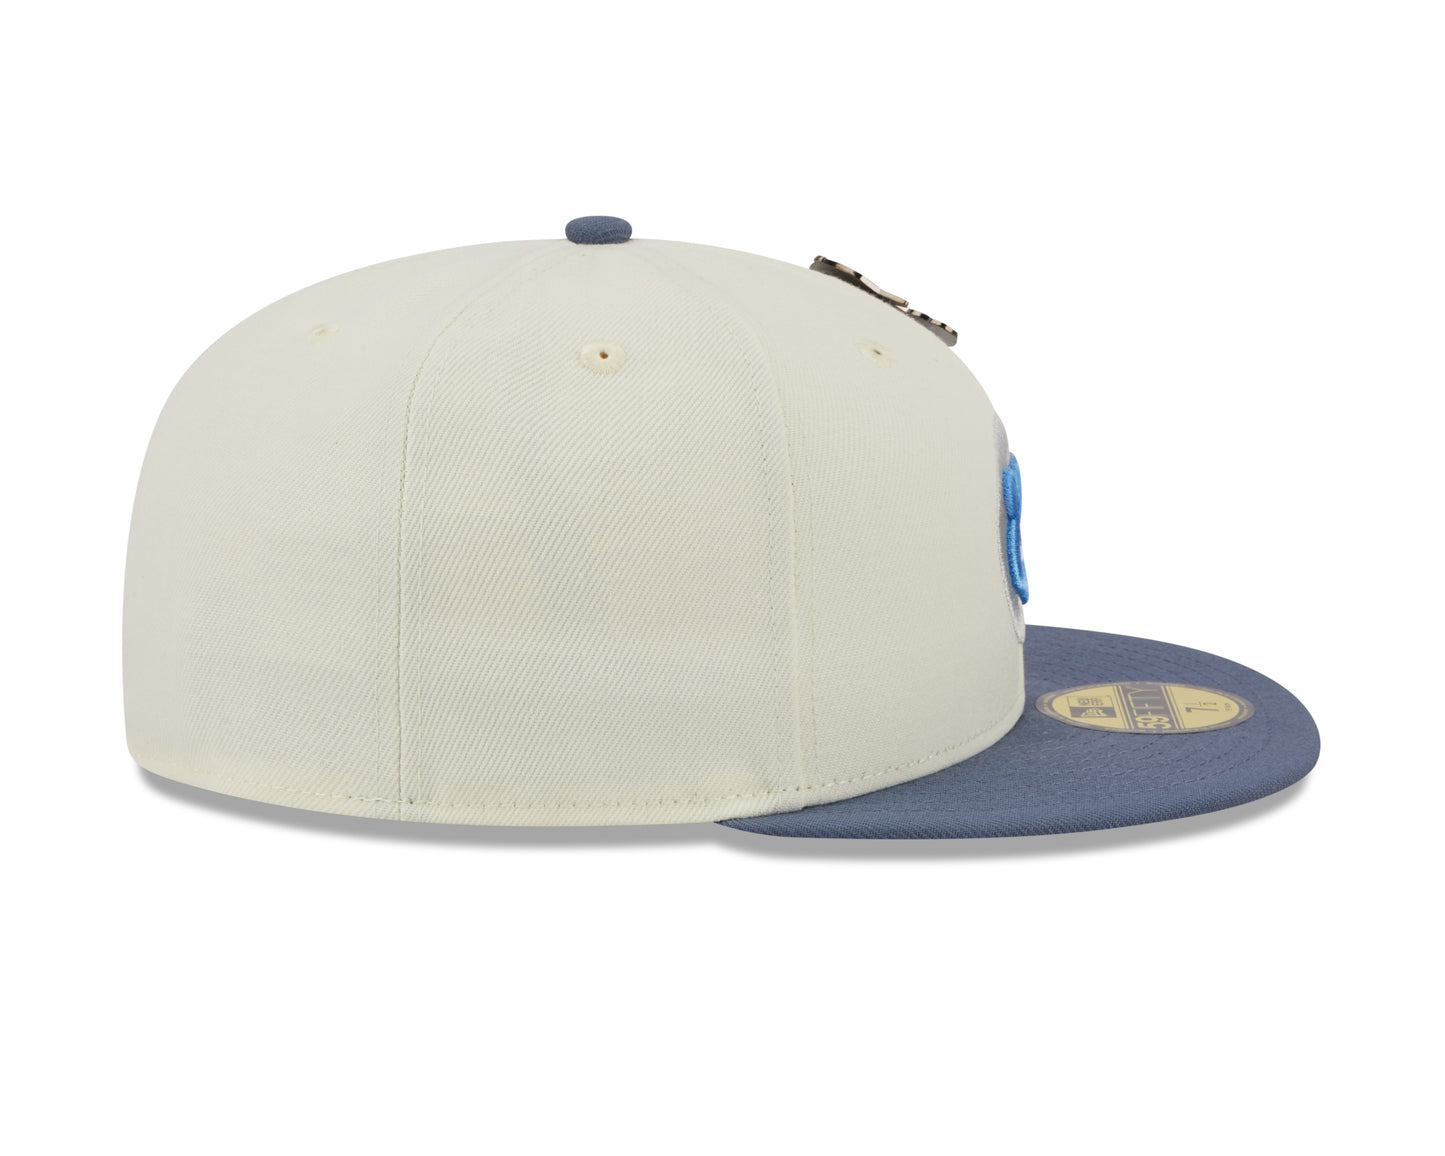 New Era 59fifty Fitted Cap Chicago Cubs Cooperstown THE ELEMENTS - Chrome White/Blue - Headz Up 